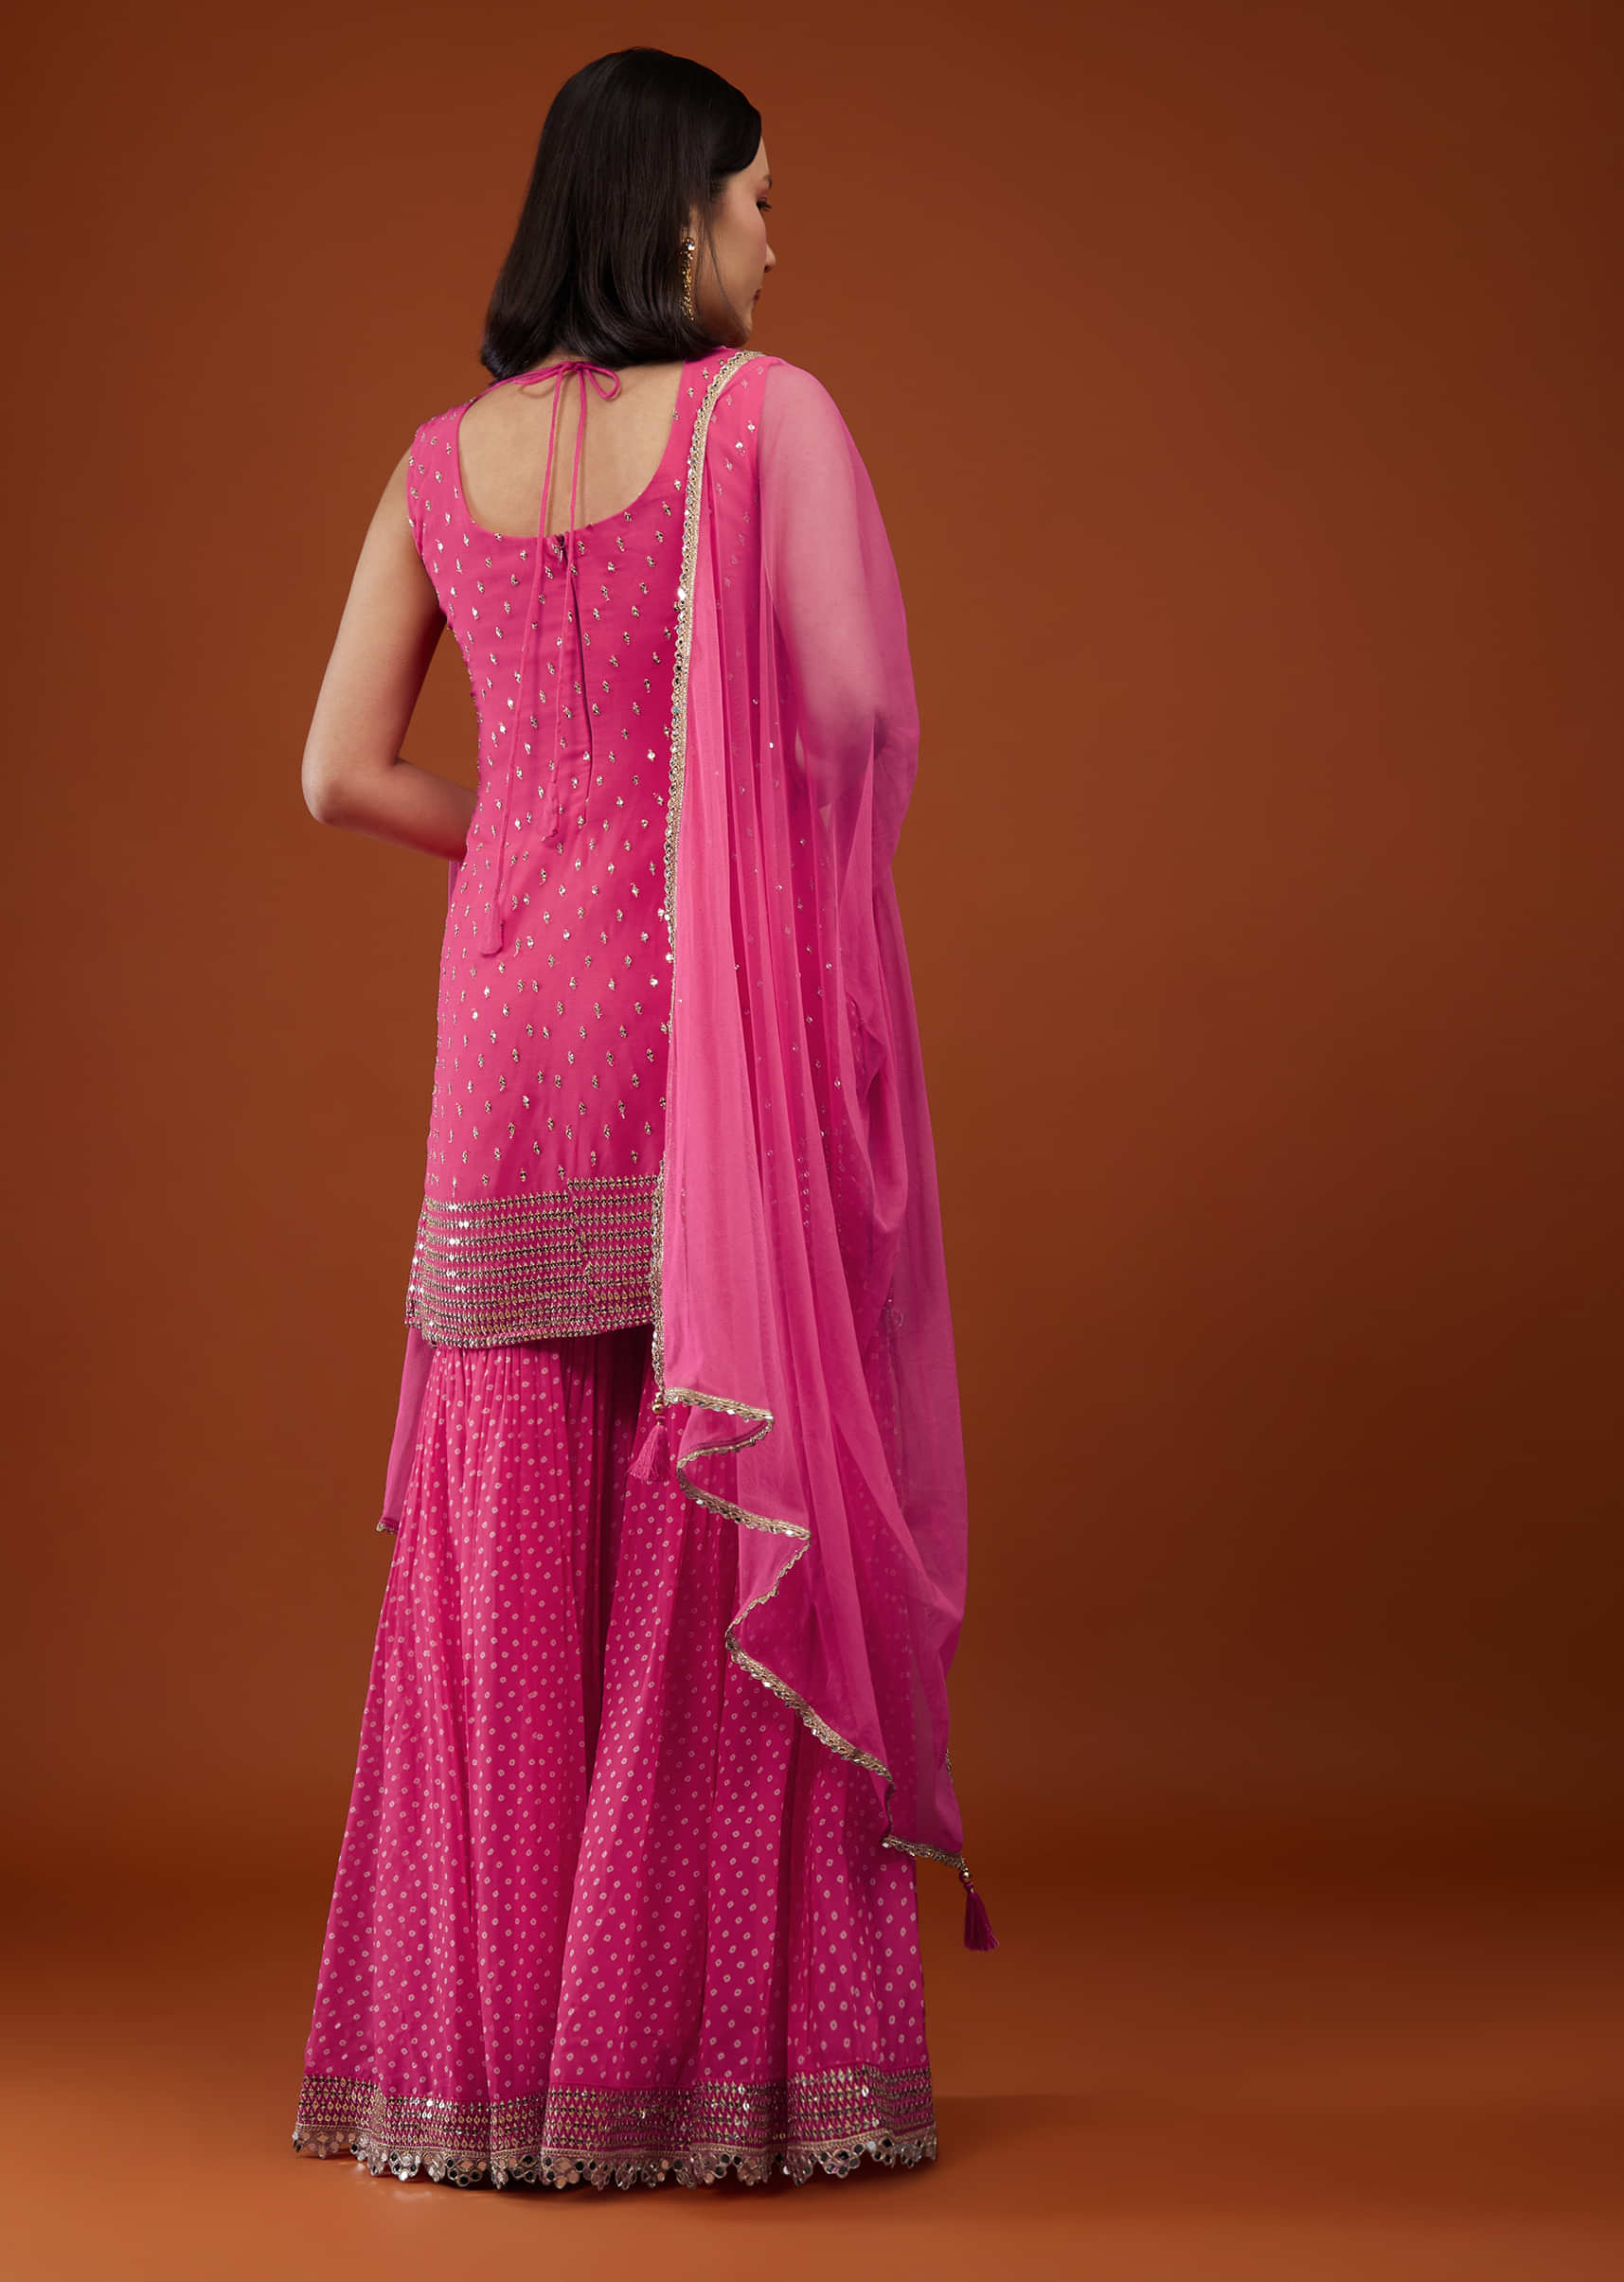 Hot Pink Georgette Sharara Suit With Bandhani Print And Embroidery